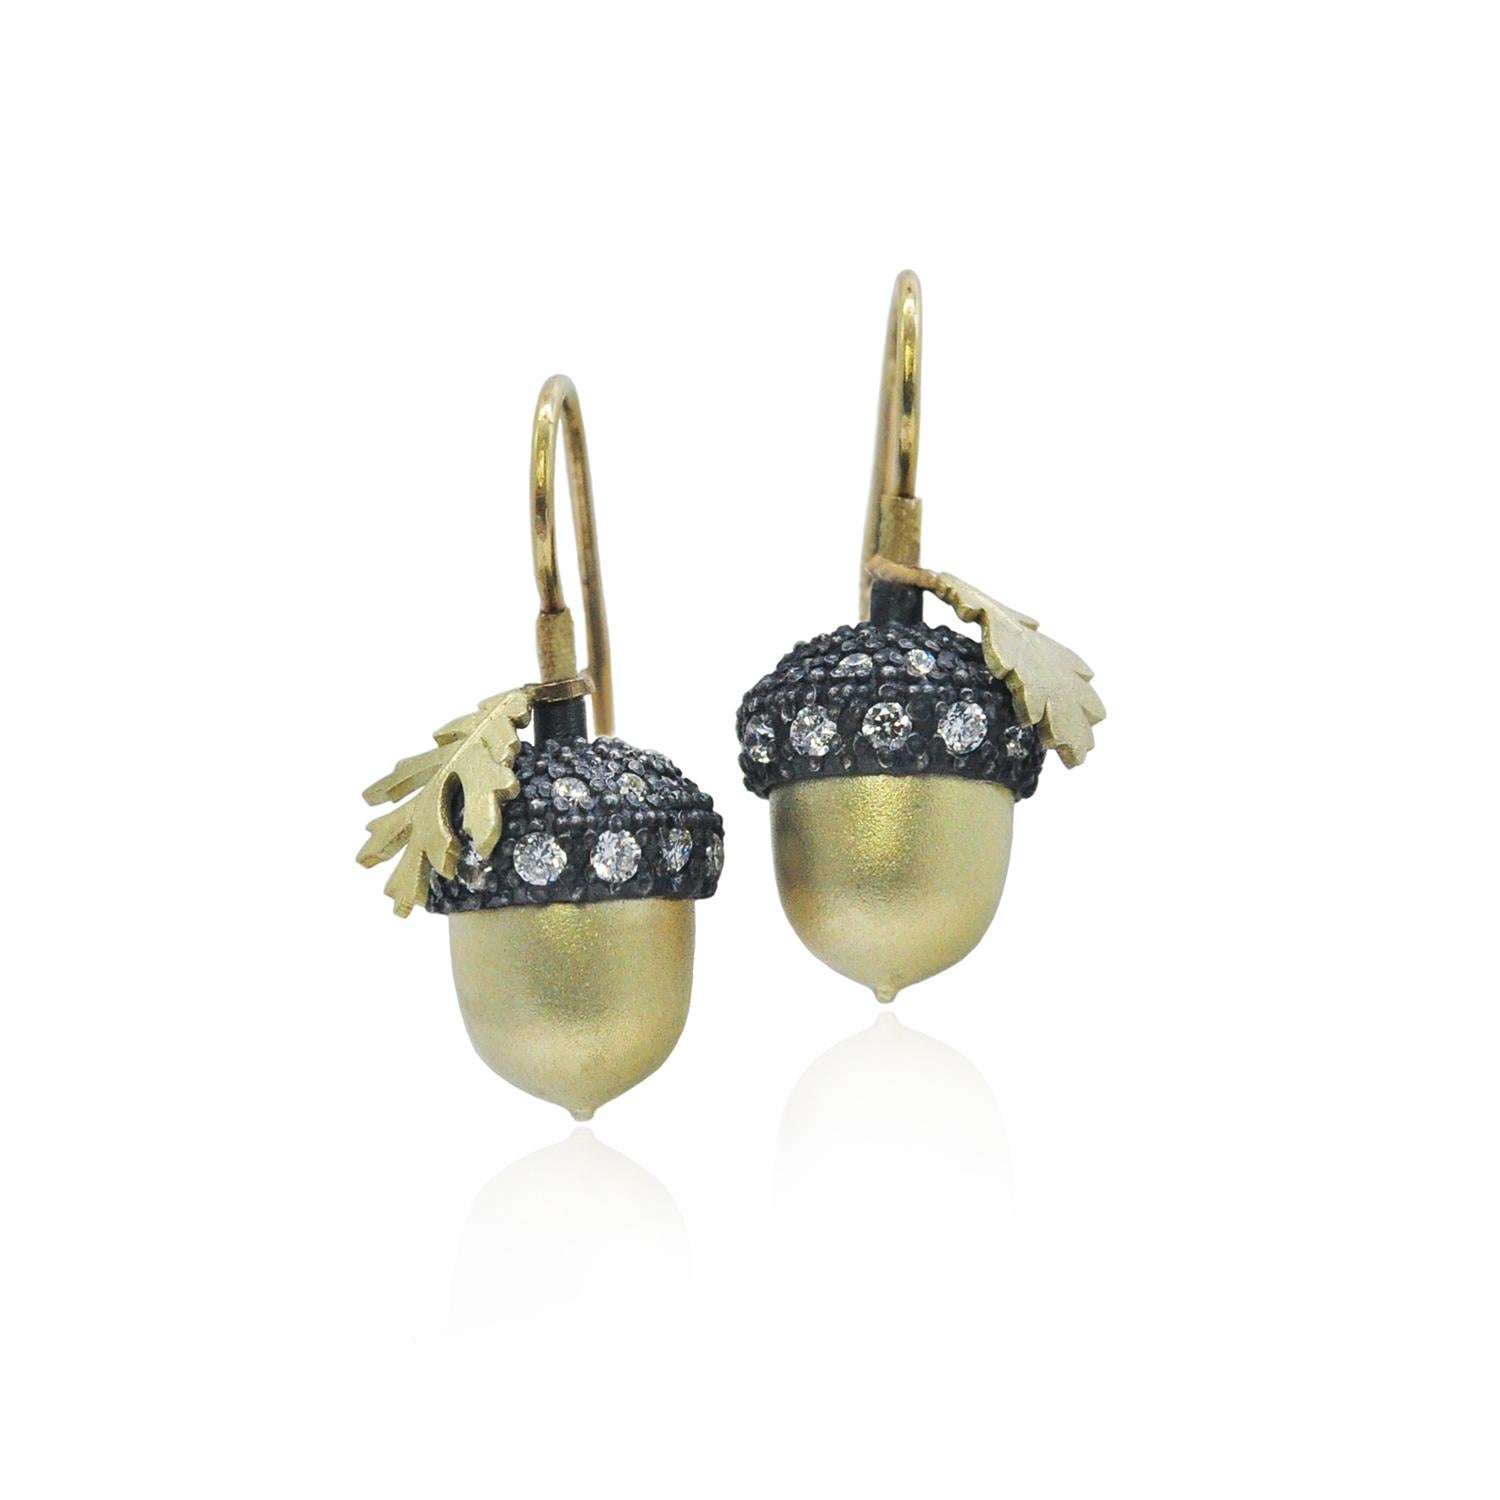 An homage to the mighty oak tree, these stunning earrings feature a duo of silver and gold acorns with diamond encrusted tops. Beautifully crafted acorns in 18k yellow gold, oxidized silver and pave set diamond top. 18ky wires. the perfect accent